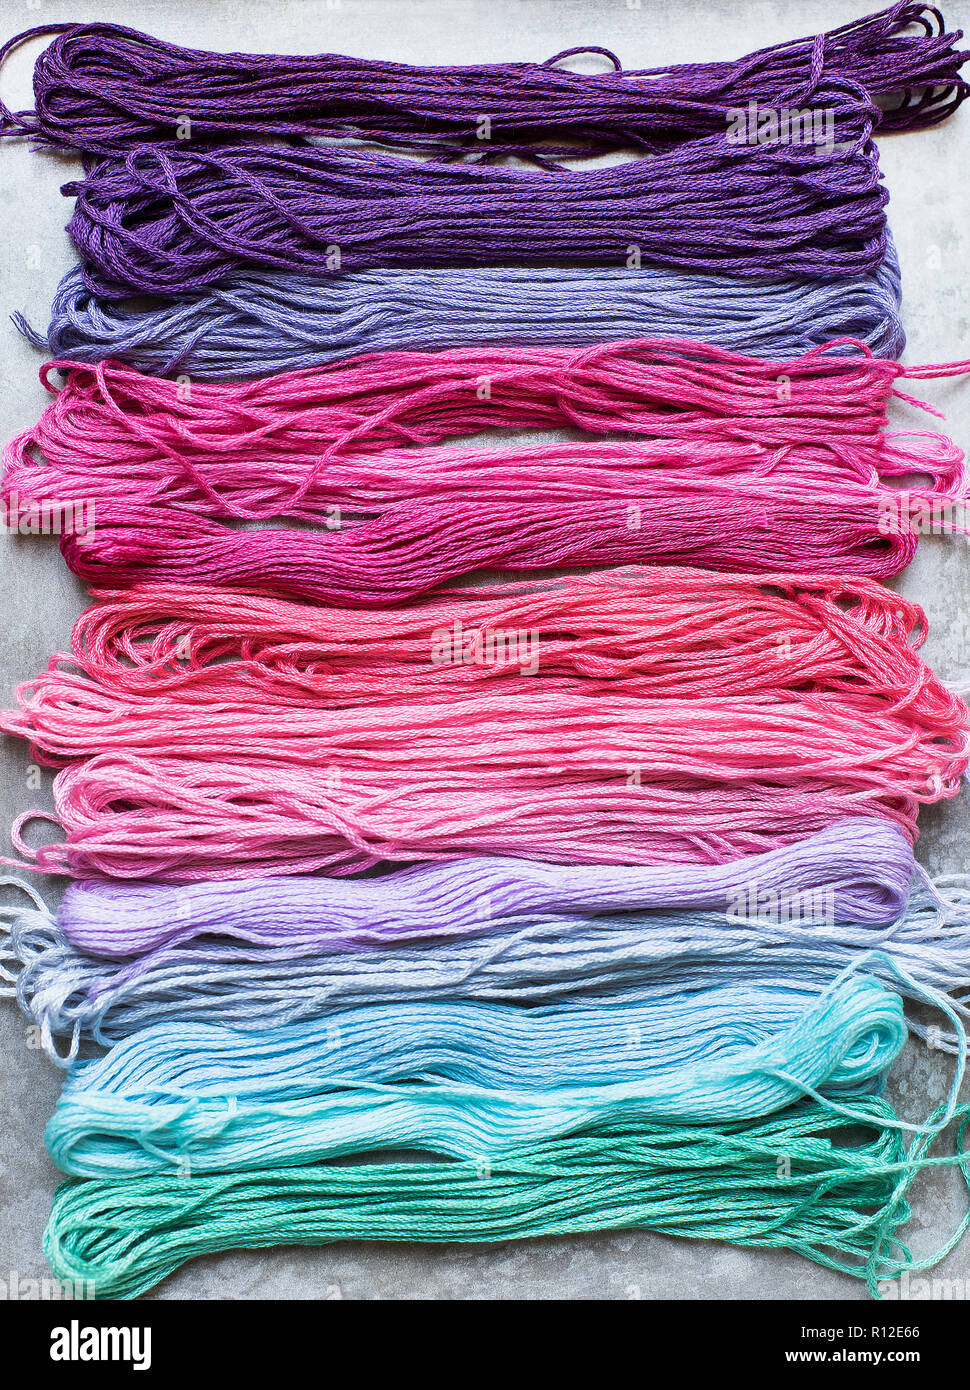 Colourful embroidery threads Stock Photo